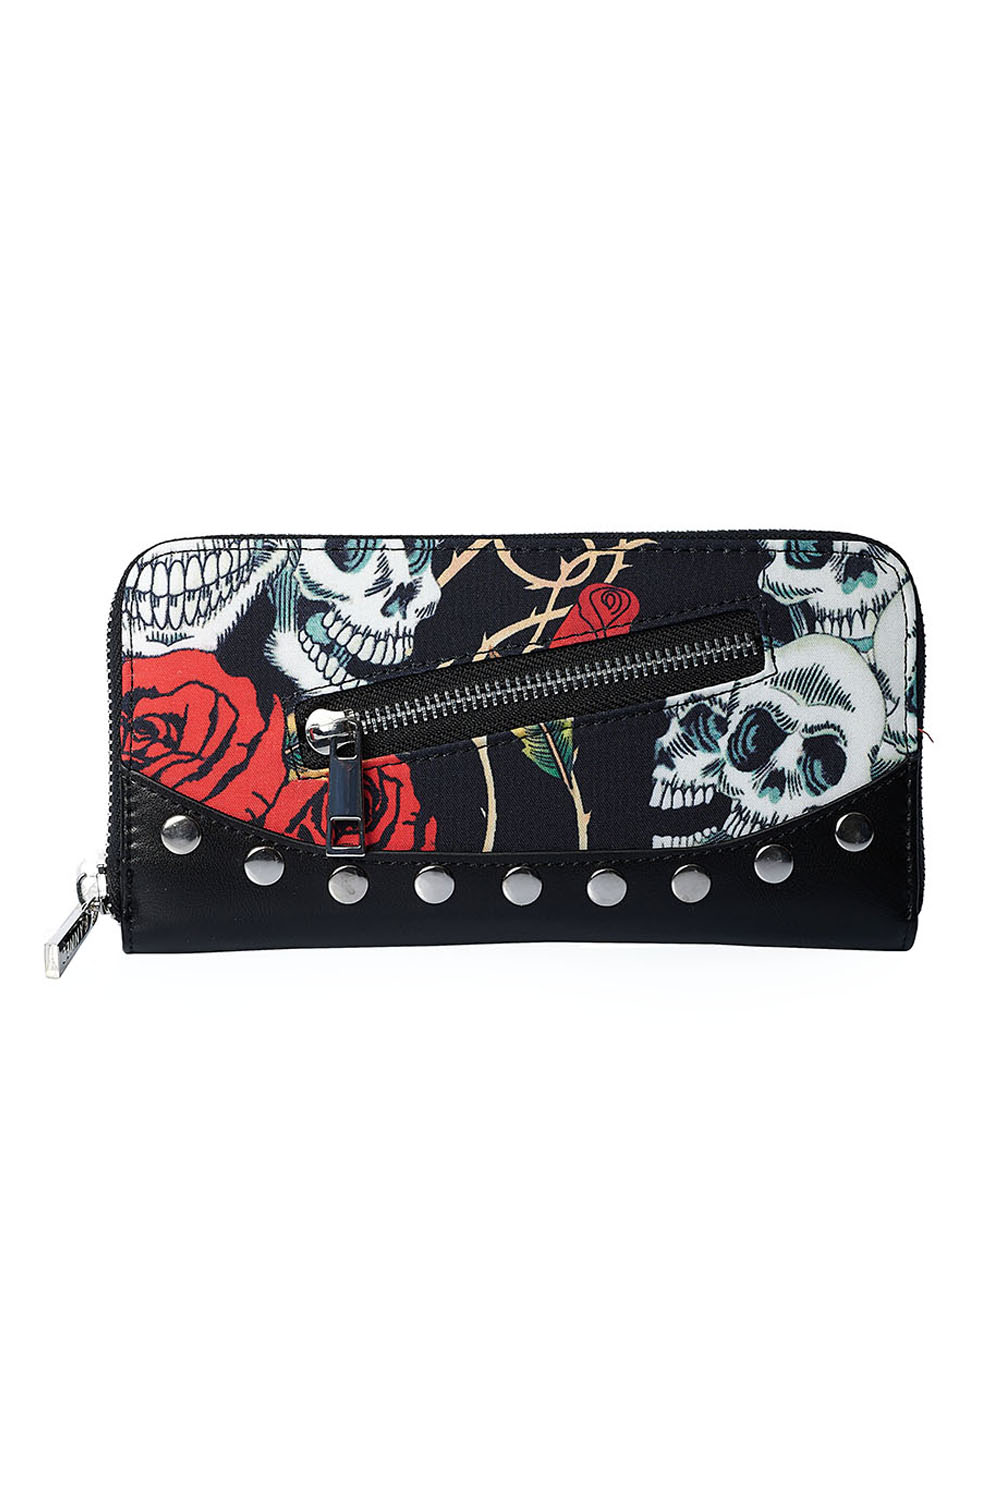  SKULLS AND ROSES WALLET BRAND : BANNED